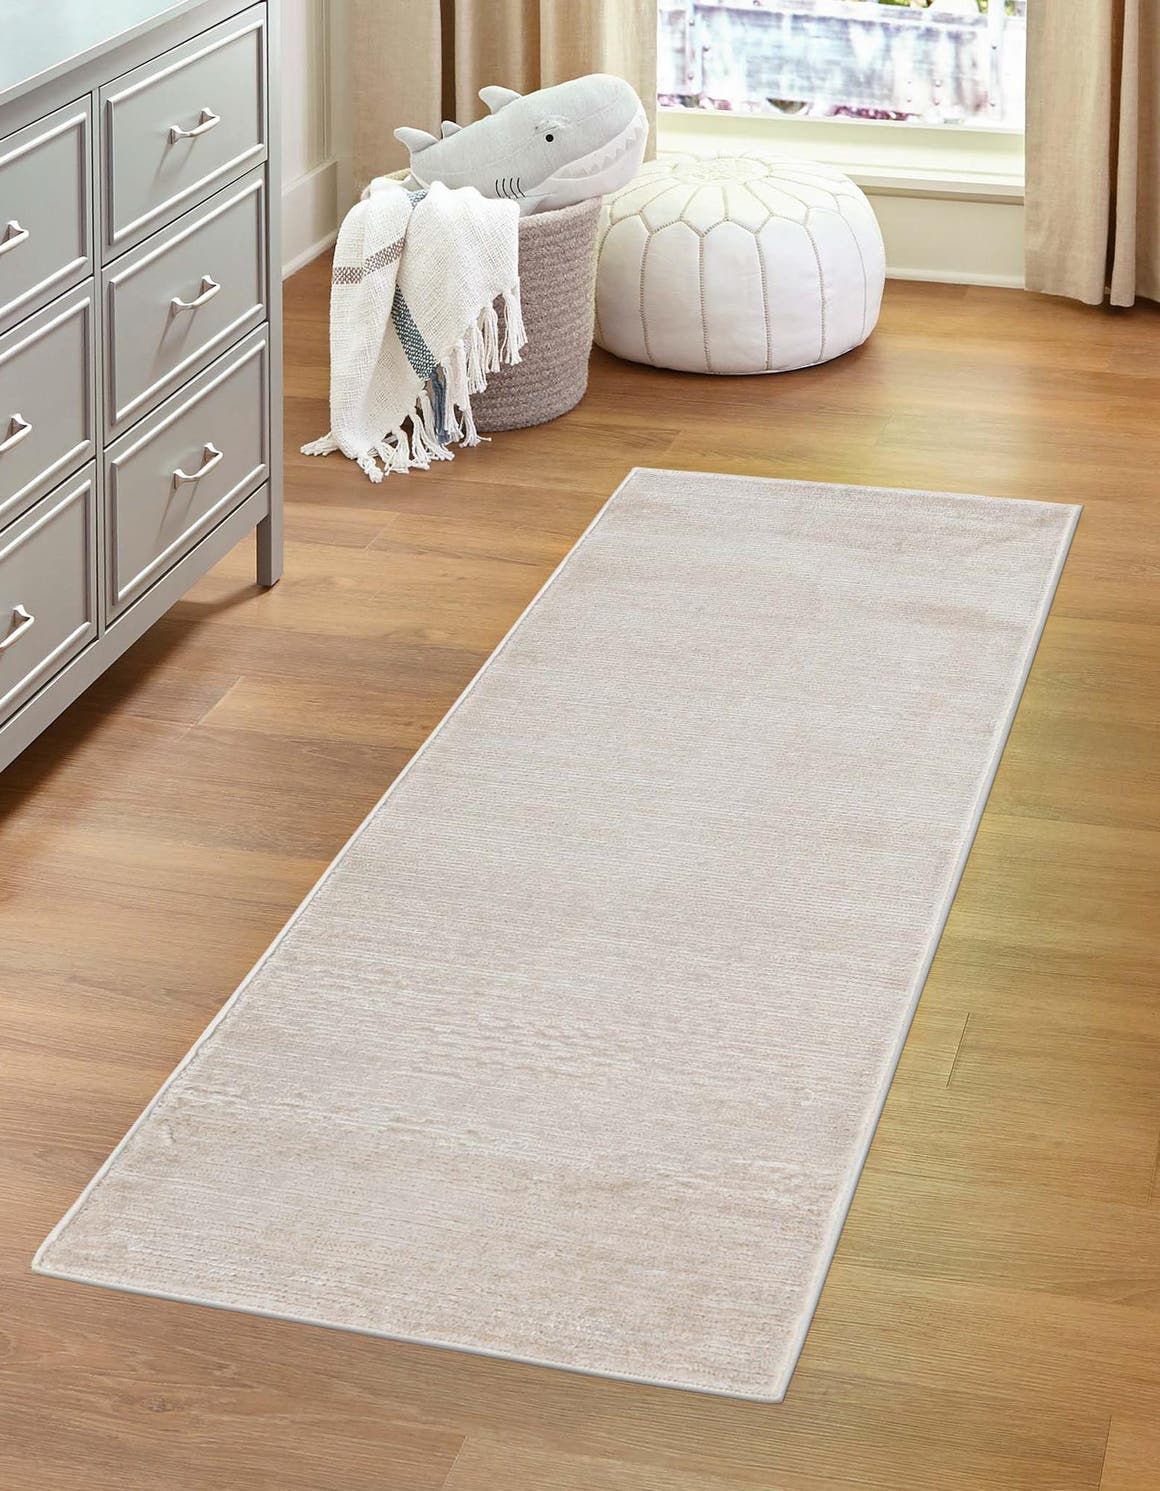 Rugs Finsbury Collection Rug – 2' X 9' 10 Runner Ivory Medium Rug  Perfect For Living Rooms, Large Dining Rooms, Open Floorplans – Walmart Inside Finsbury Runner Rugs (View 5 of 15)